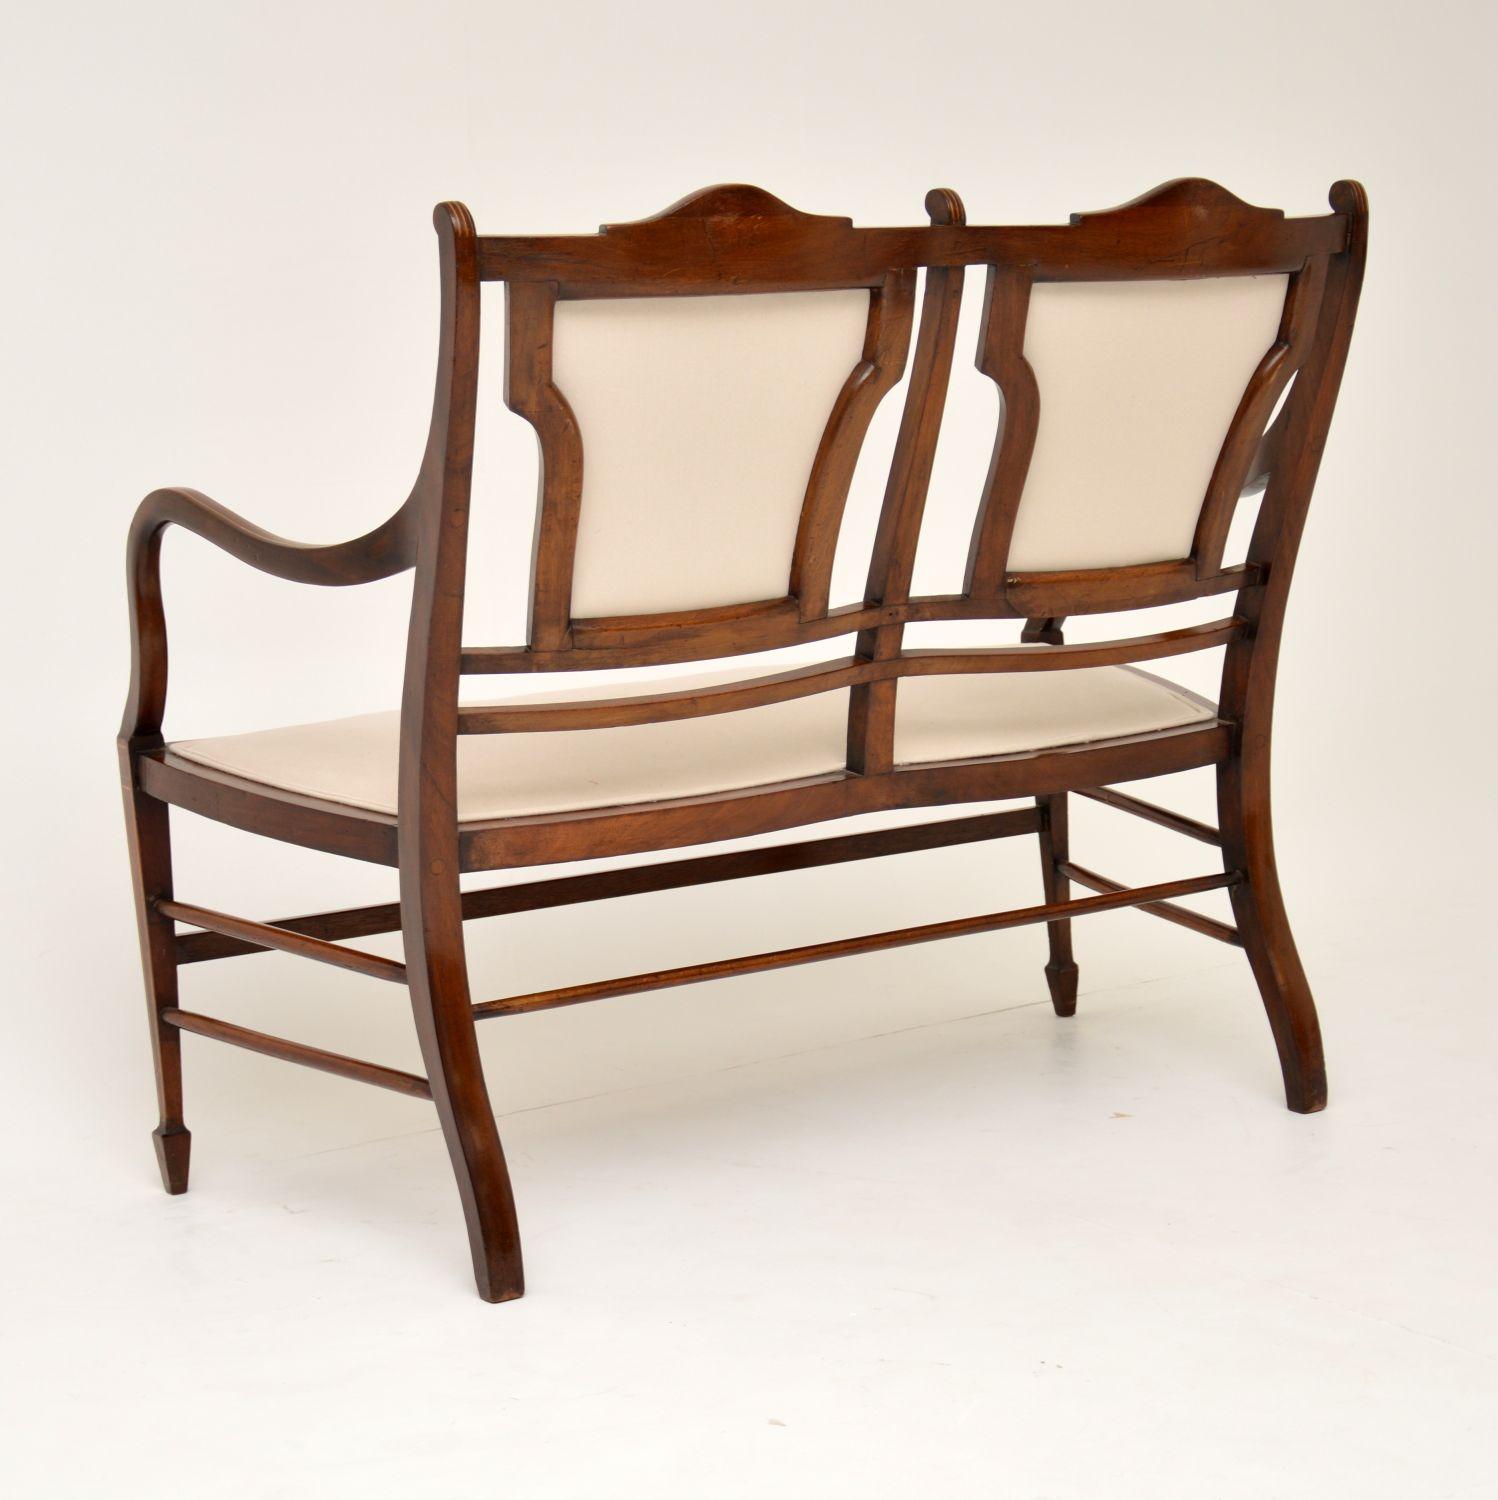 Very elegant antique Sheraton style mahogany settee dating from the 1890-1900 period and in good original condition. There are a few age related markings on the frame, but they have been polished out and everything is in character, plus it’s